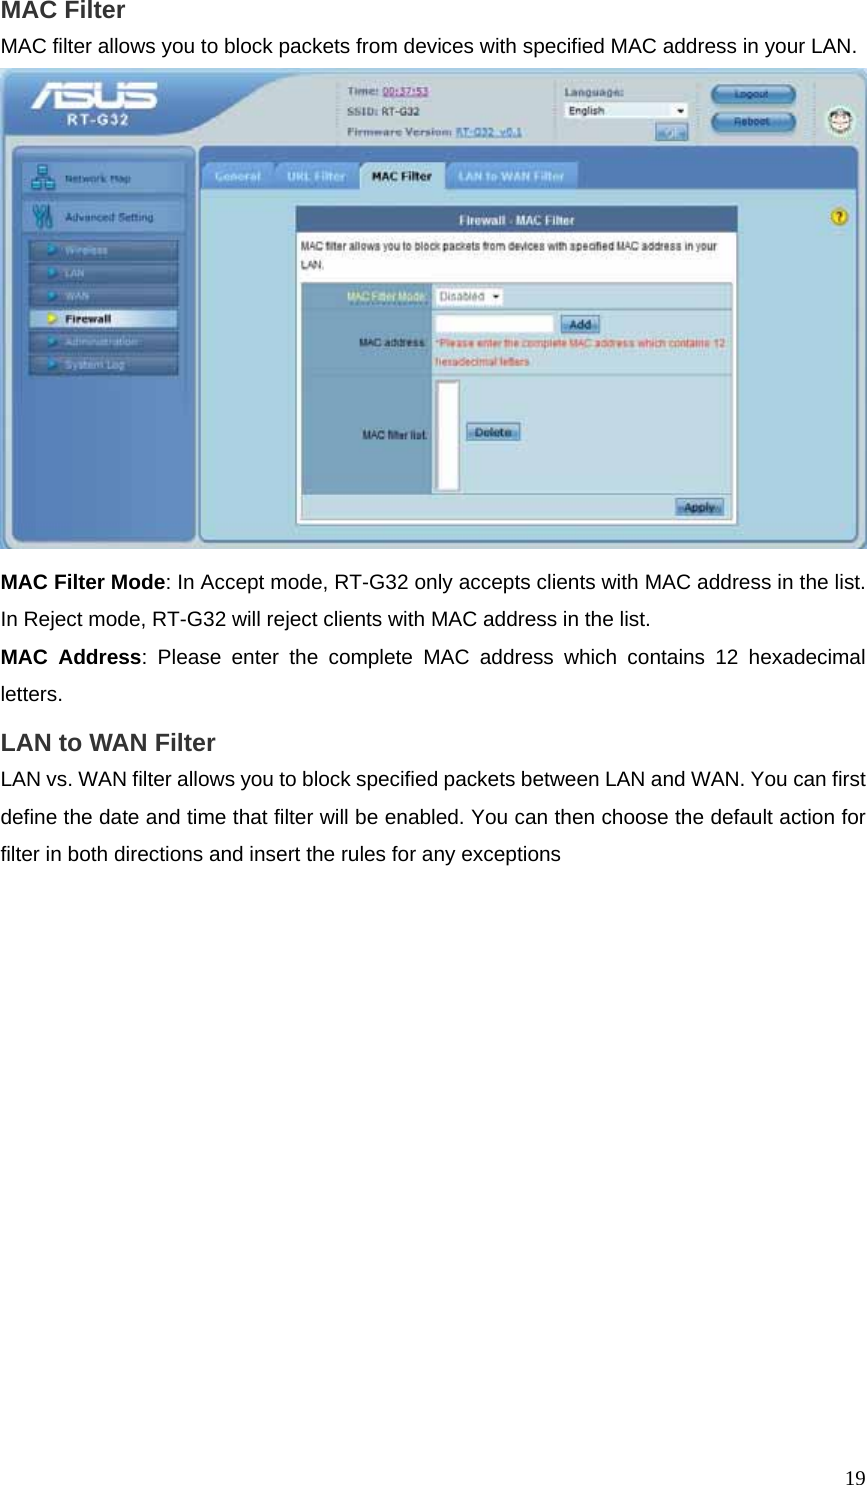  19MAC Filter   MAC filter allows you to block packets from devices with specified MAC address in your LAN.  MAC Filter Mode: In Accept mode, RT-G32 only accepts clients with MAC address in the list. In Reject mode, RT-G32 will reject clients with MAC address in the list. MAC Address: Please enter the complete MAC address which contains 12 hexadecimal letters.  LAN to WAN Filter LAN vs. WAN filter allows you to block specified packets between LAN and WAN. You can first define the date and time that filter will be enabled. You can then choose the default action for filter in both directions and insert the rules for any exceptions 